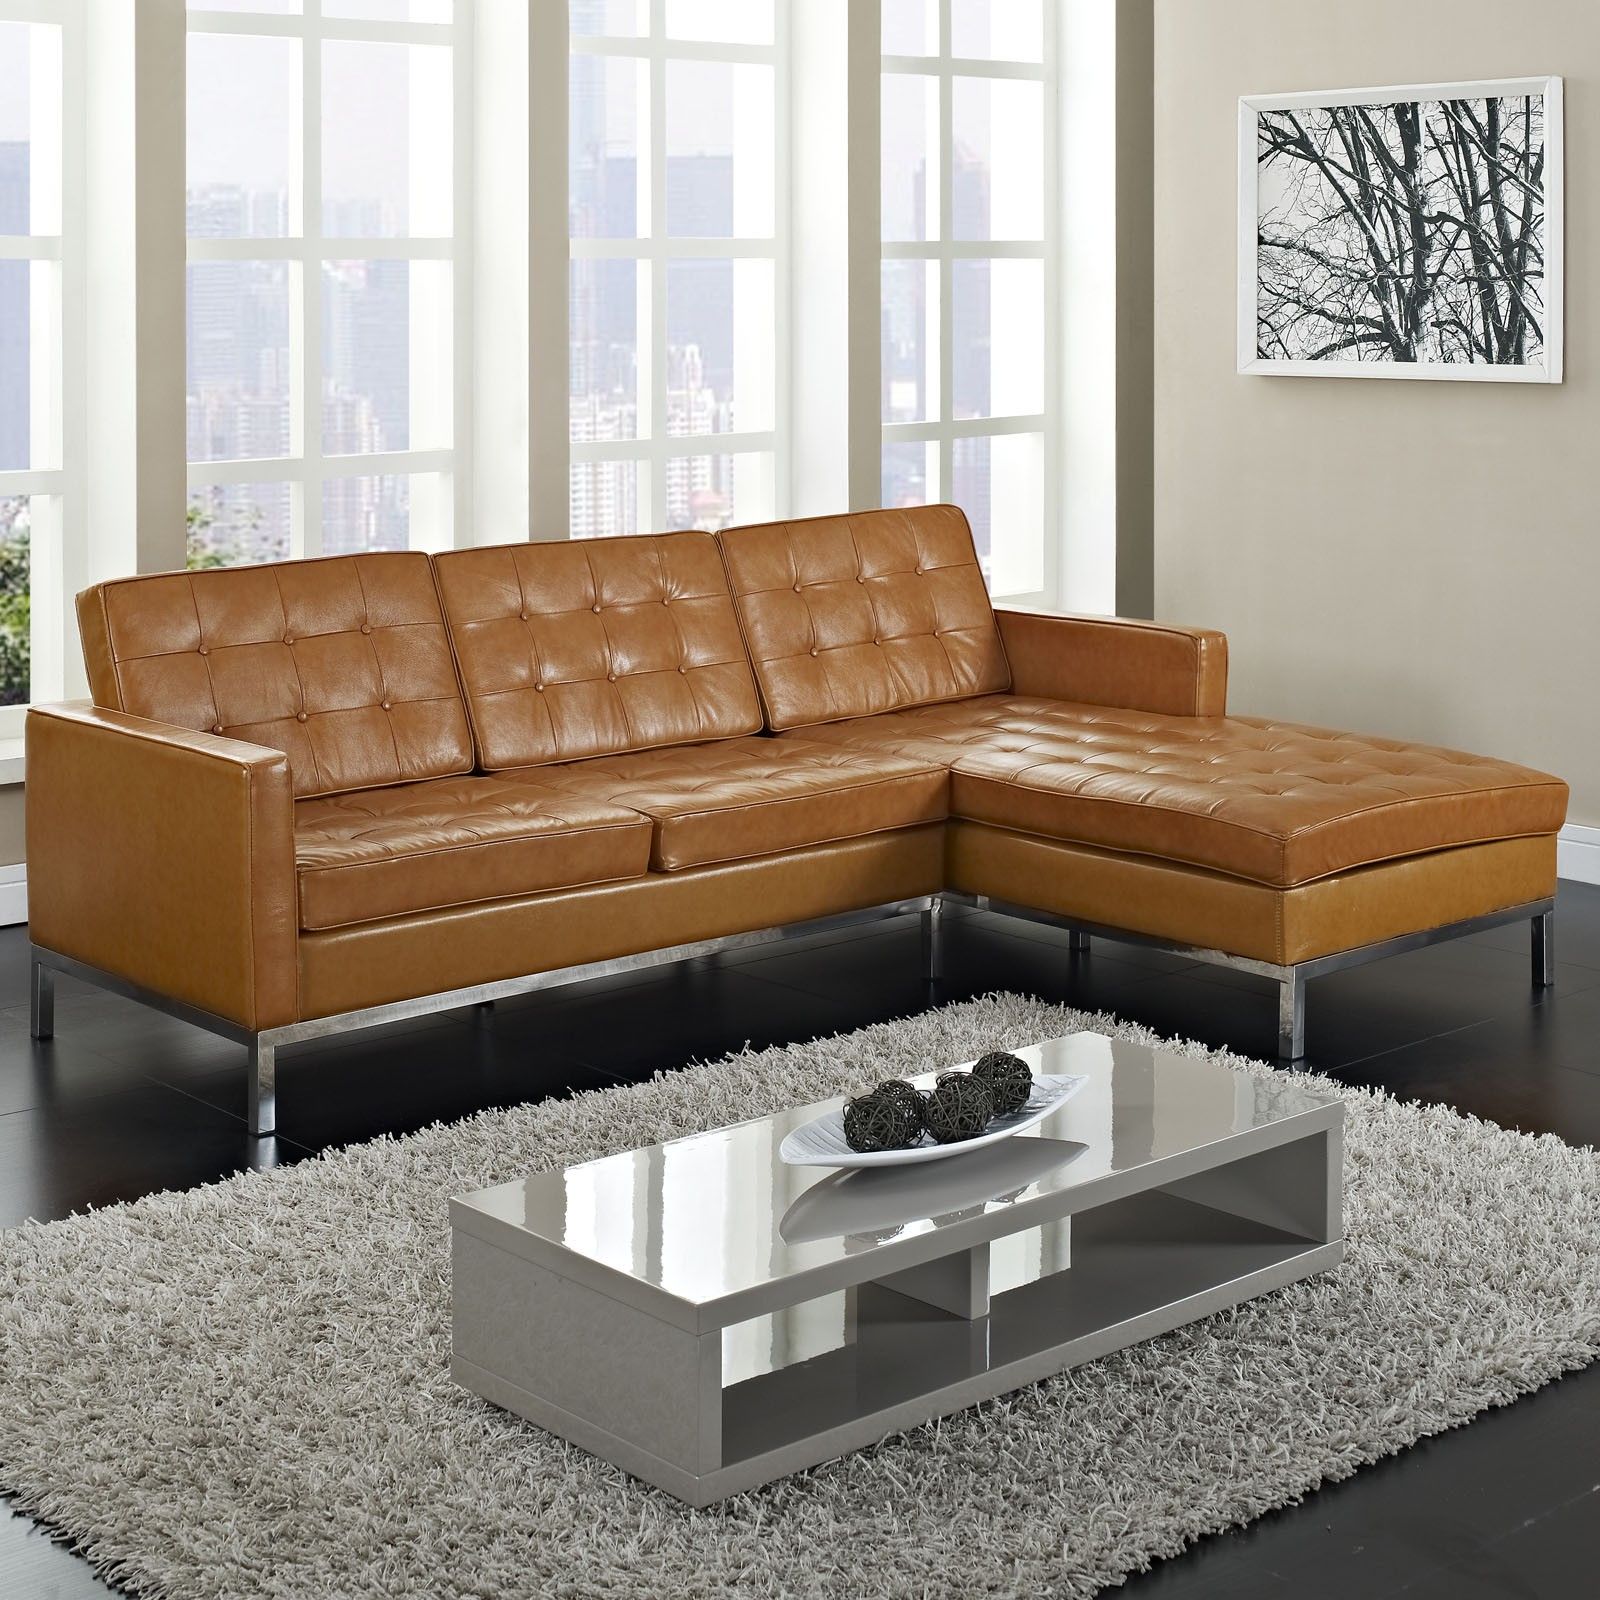 Furniture, Maximizing Small Living Room Spaces With 3 Piece Brown Leather  Tufted Sectional Sofa With Stainless Steel Legs And Glass Top Low Coffee  Table